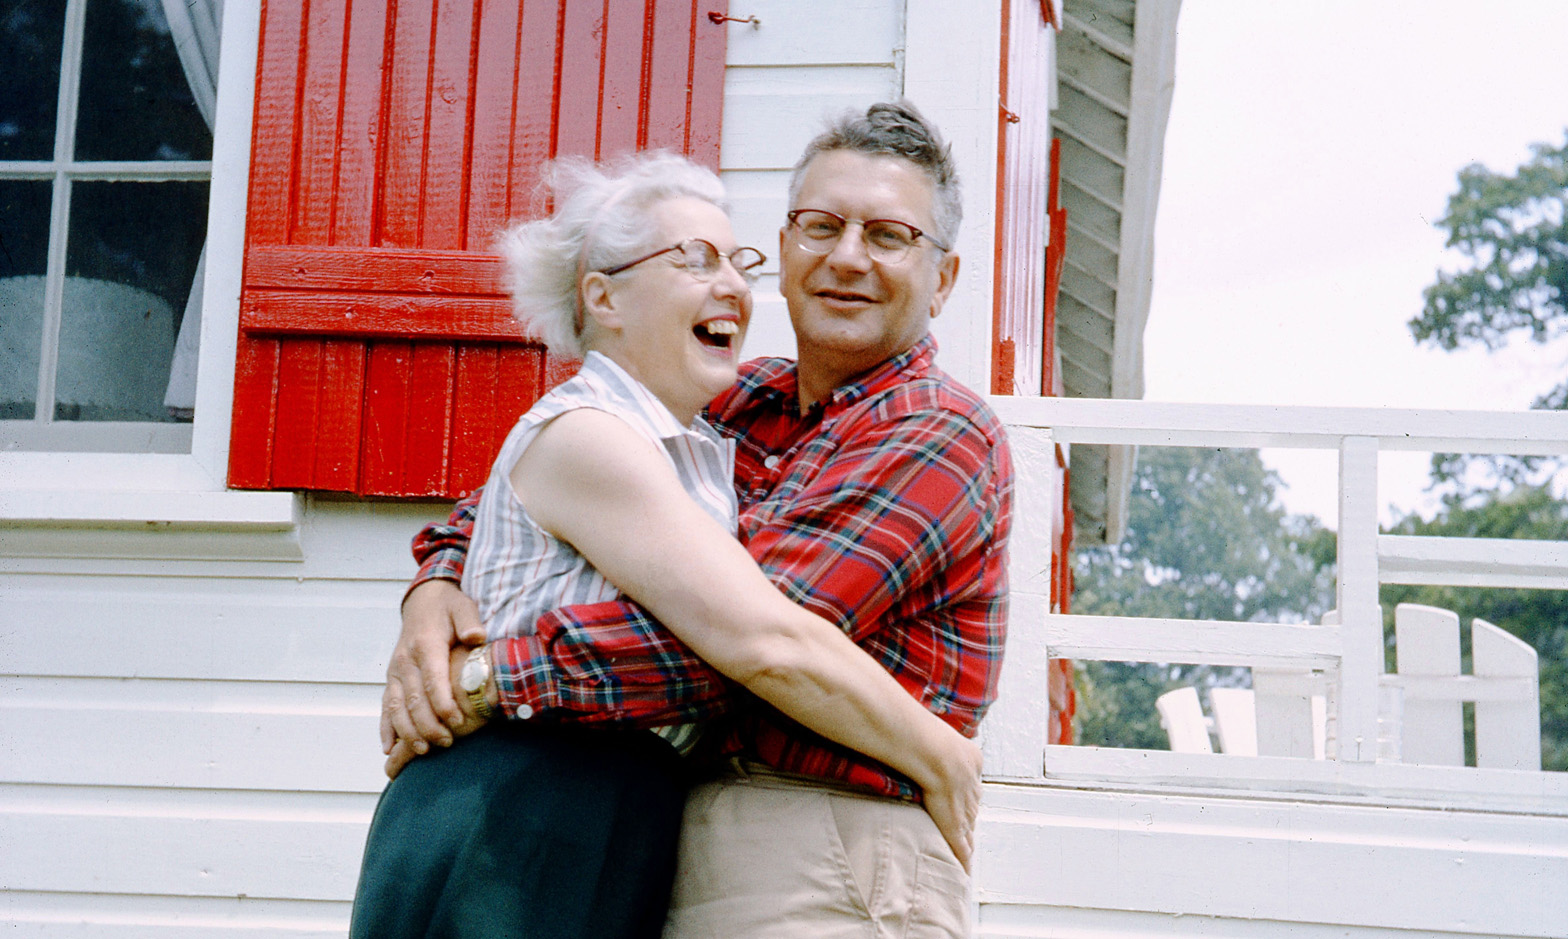 My father took this pic of my aunt and uncle fifty-two years ago at their cottage, located on a bluff overlooking Lake Erie just down the dirt lakeshore road from Port Dover, 5 miles to the west. We spent many summer weekends there, right across the road from a one-room school house that was still operating in 1959. View full size.